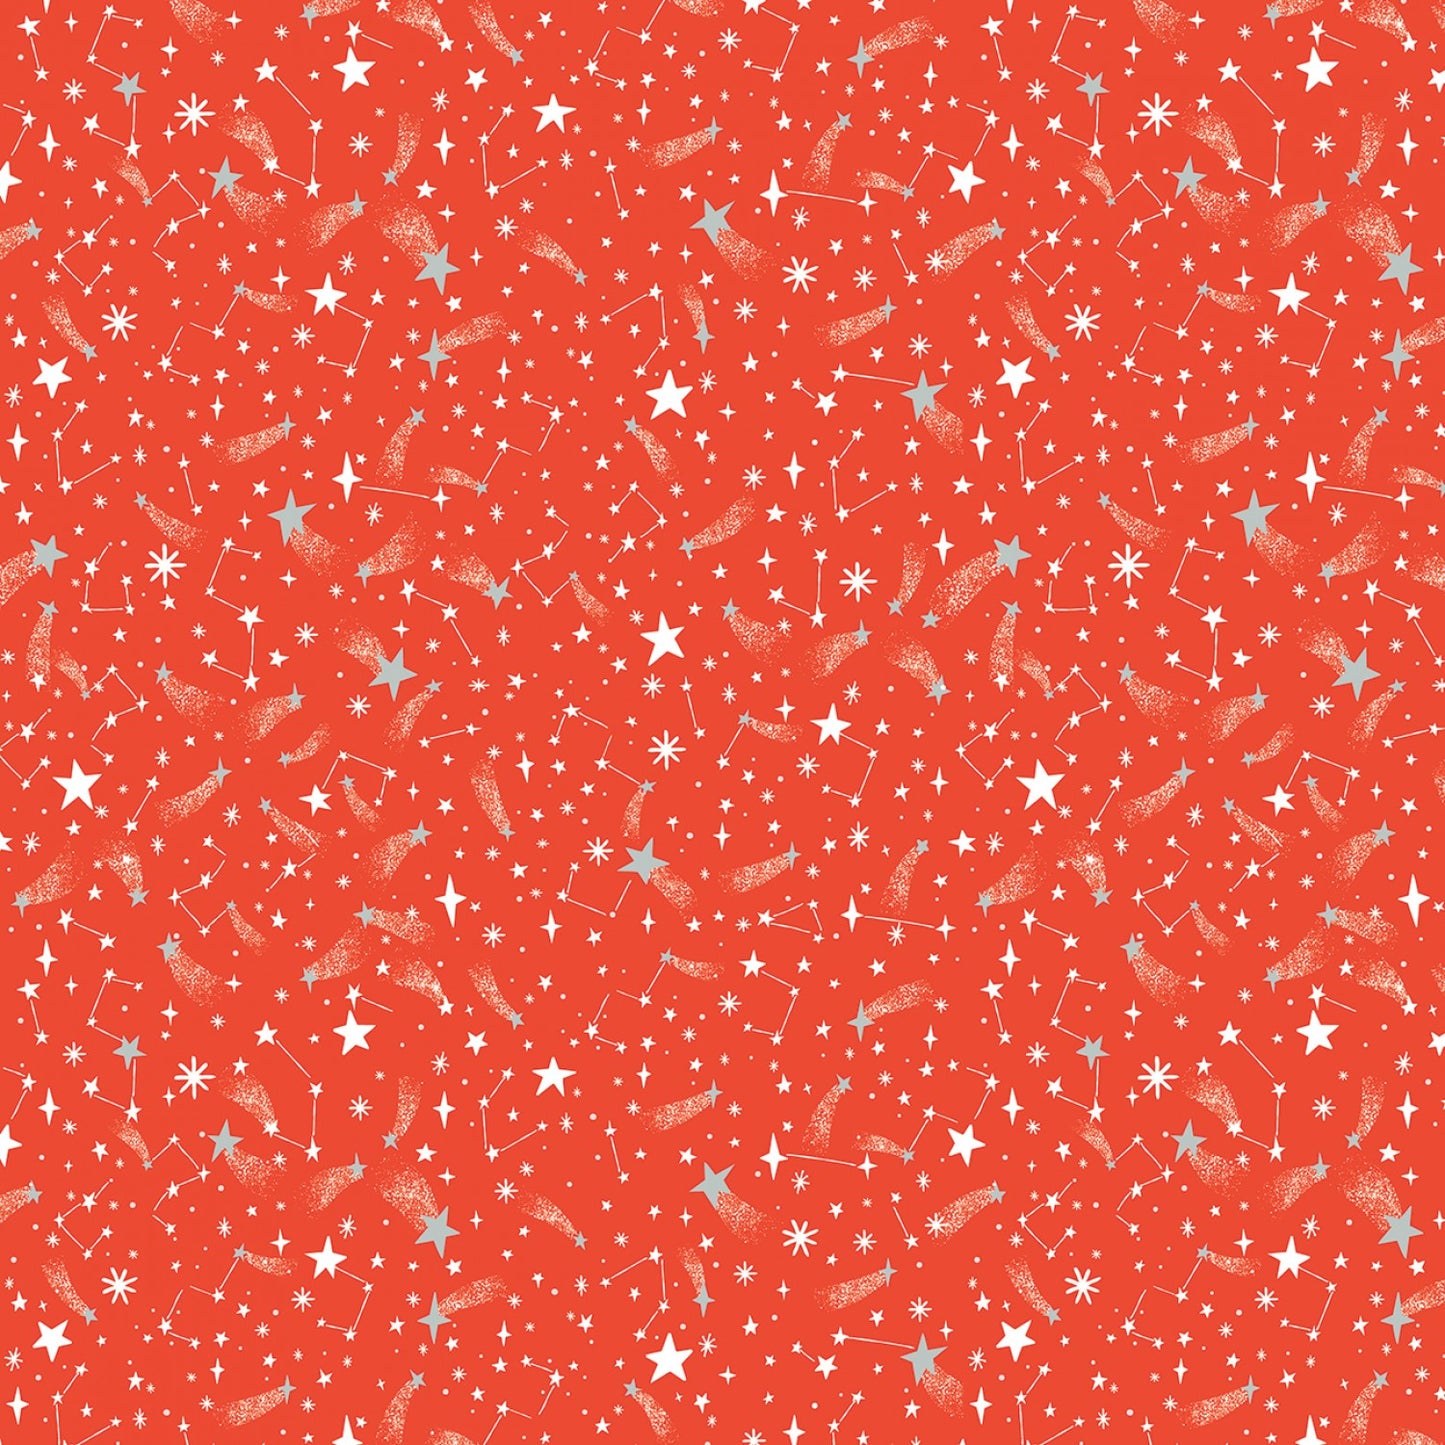 Manufacturer: Riley Blake Designs Designer: Jill Howarth Collection: Twas Print Name: New Fallen Snow in Red Material: 100% Cotton Weight: Quilting SKU: SC13466R-RED Width: 44 inches